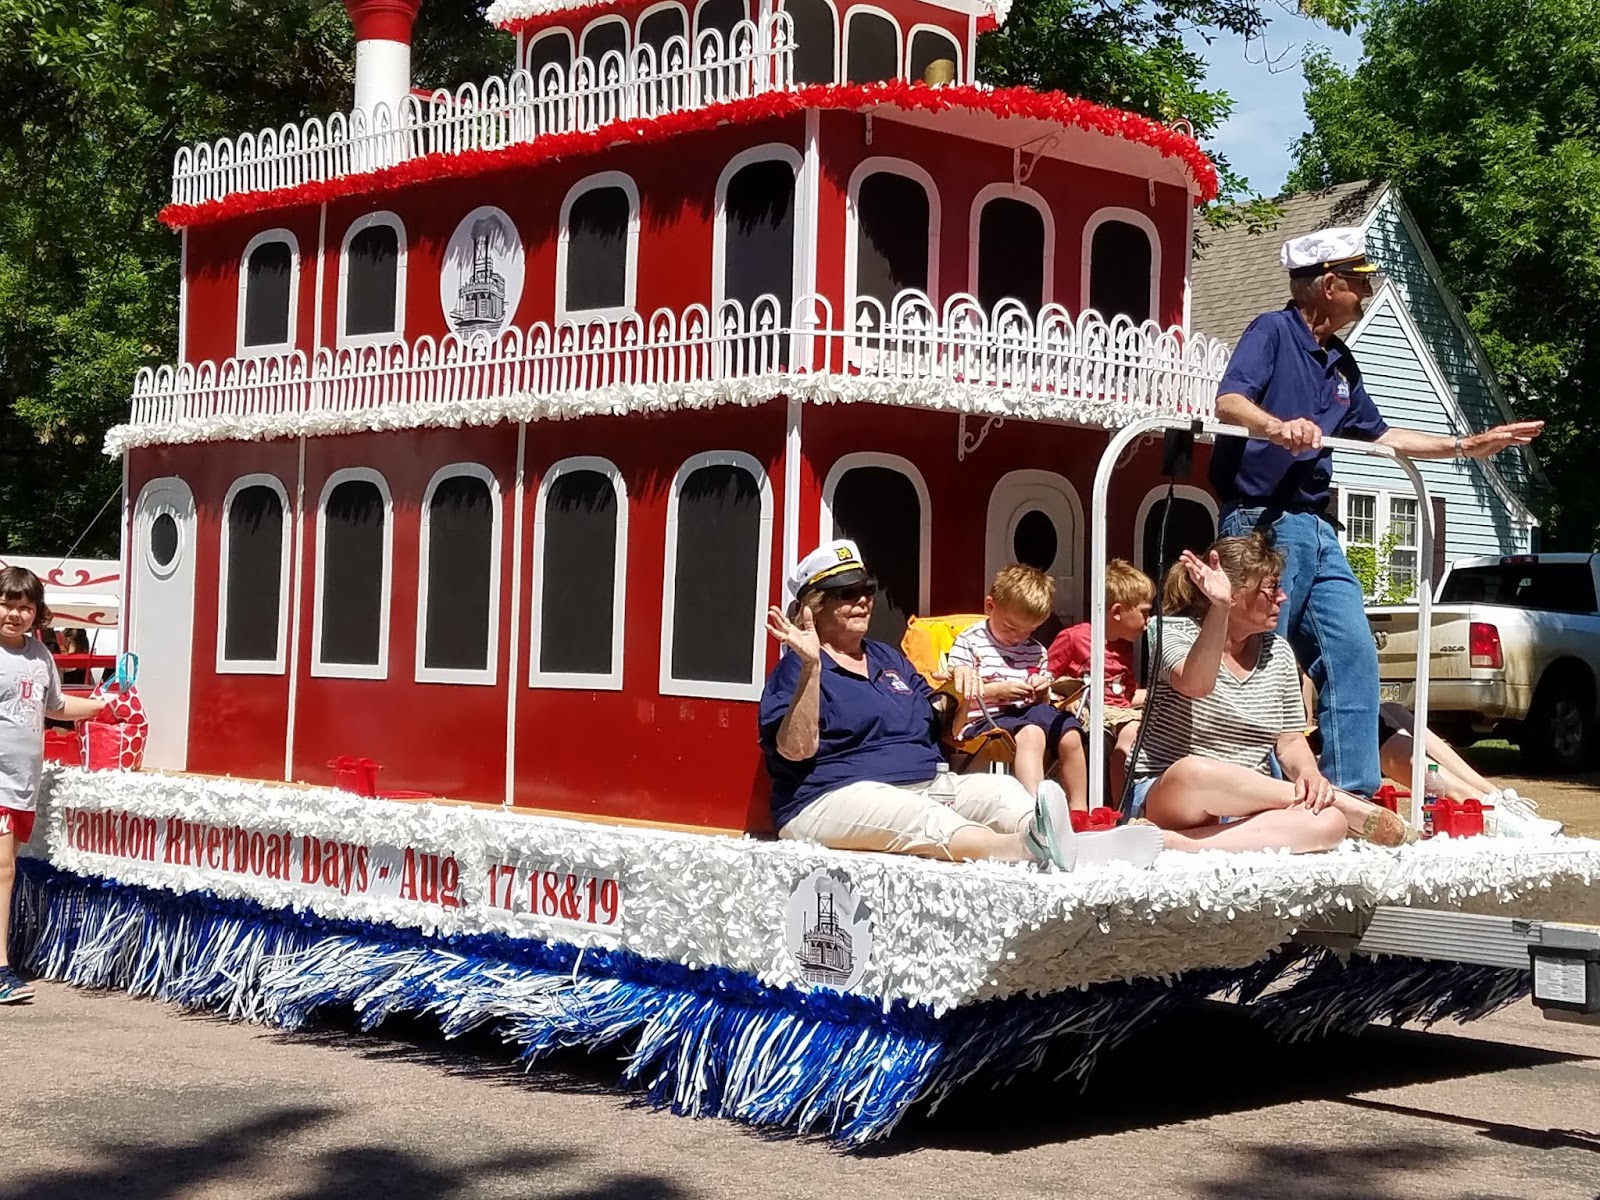 yankton riverboat days 2024 tickets price